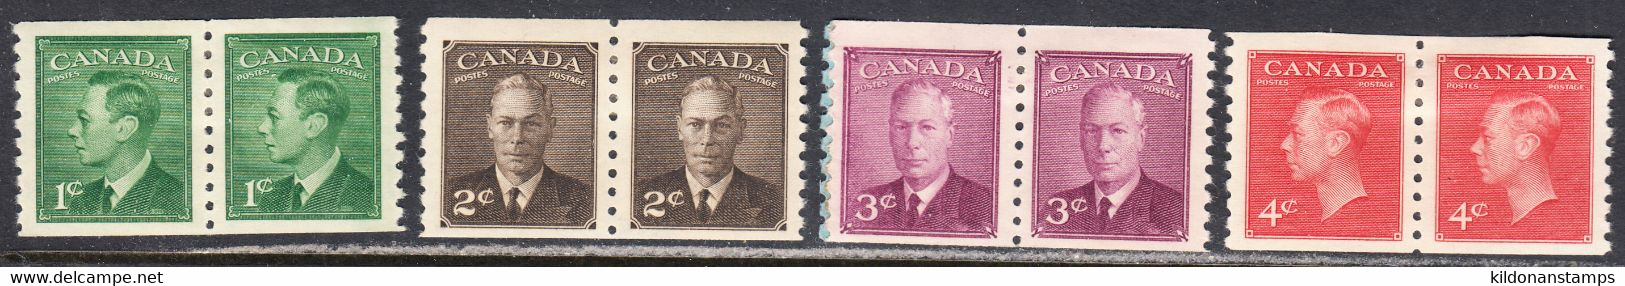 Canada 1949 Coils, Mint Mounted, Sc# 297-300, SG - Coil Stamps